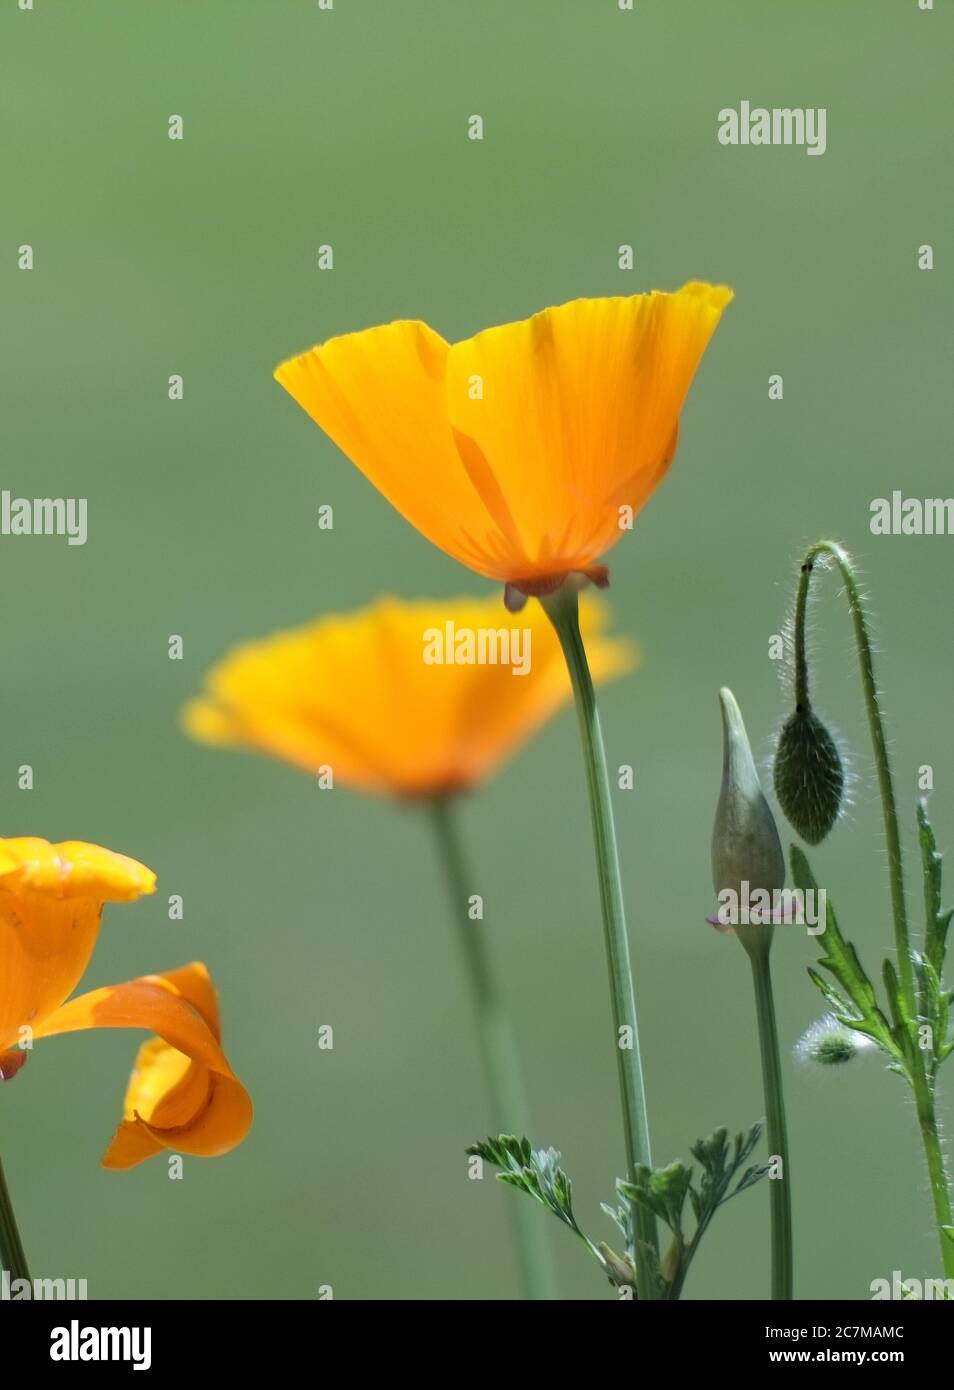 Vertical selective focus shot of beautiful yellow California poppies with a blurred green background Stock Photo